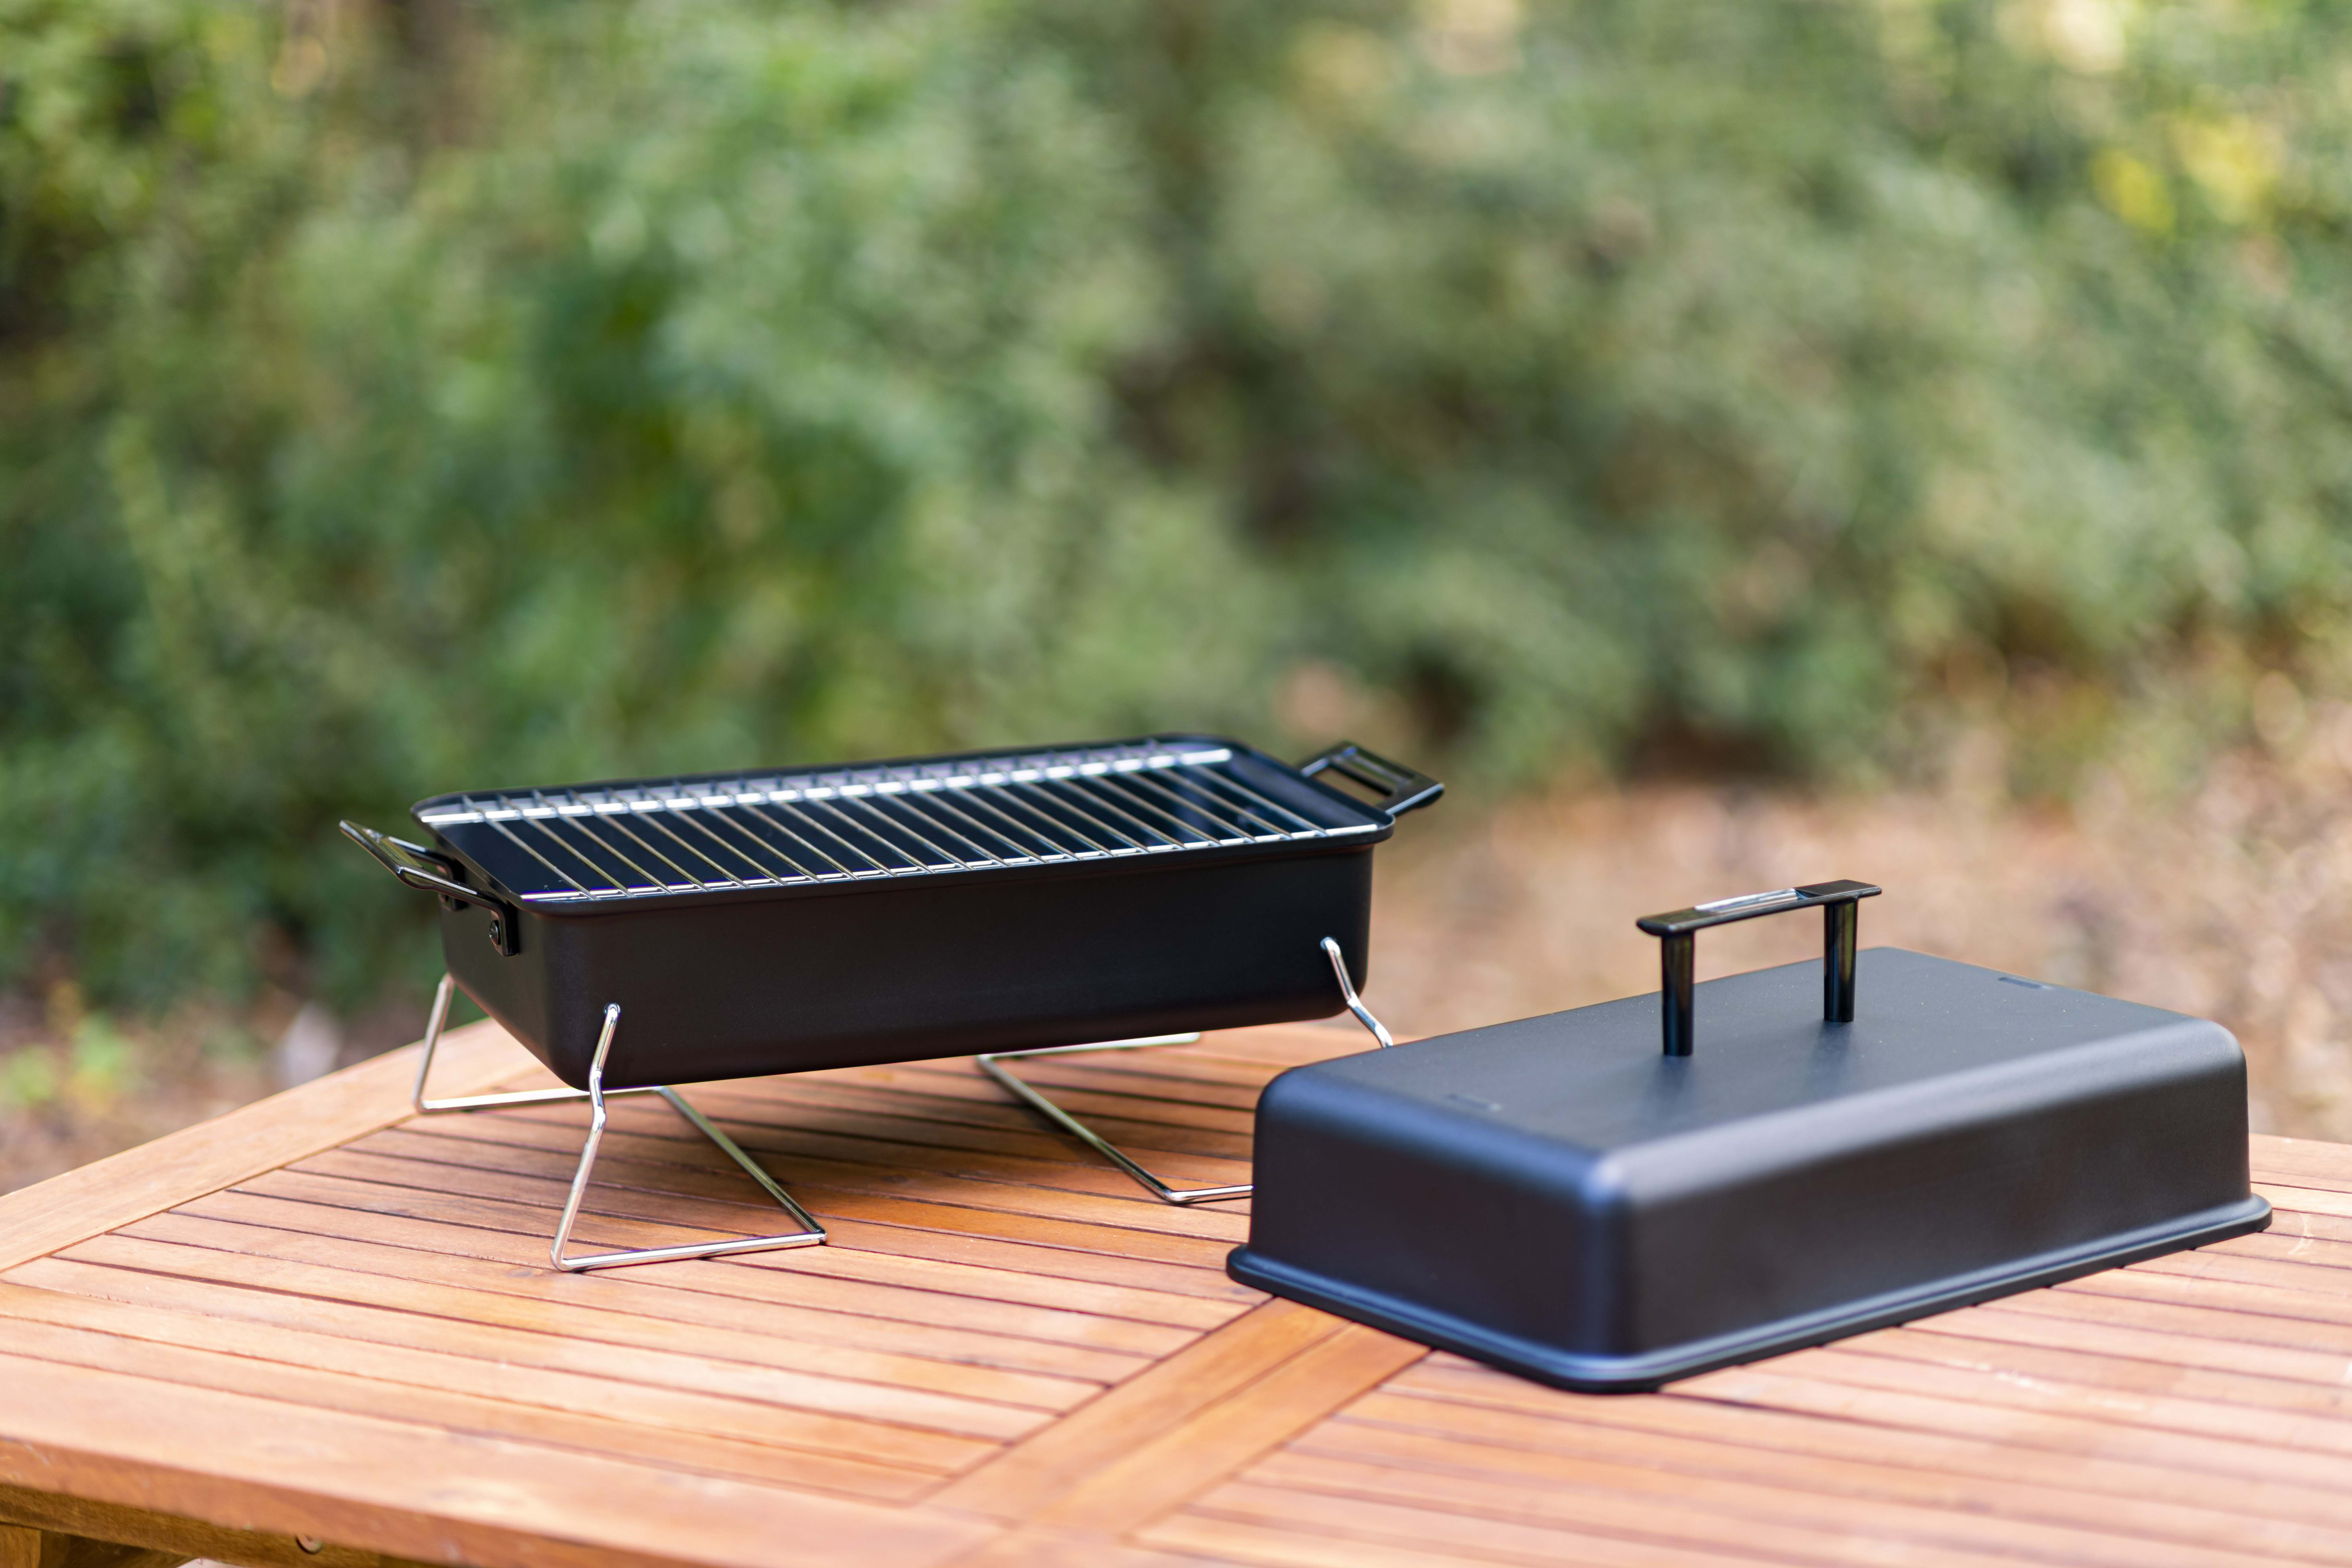 Char-Broil 190 Portable Tabletop Charcoal Grill- Black - image 2 of 8